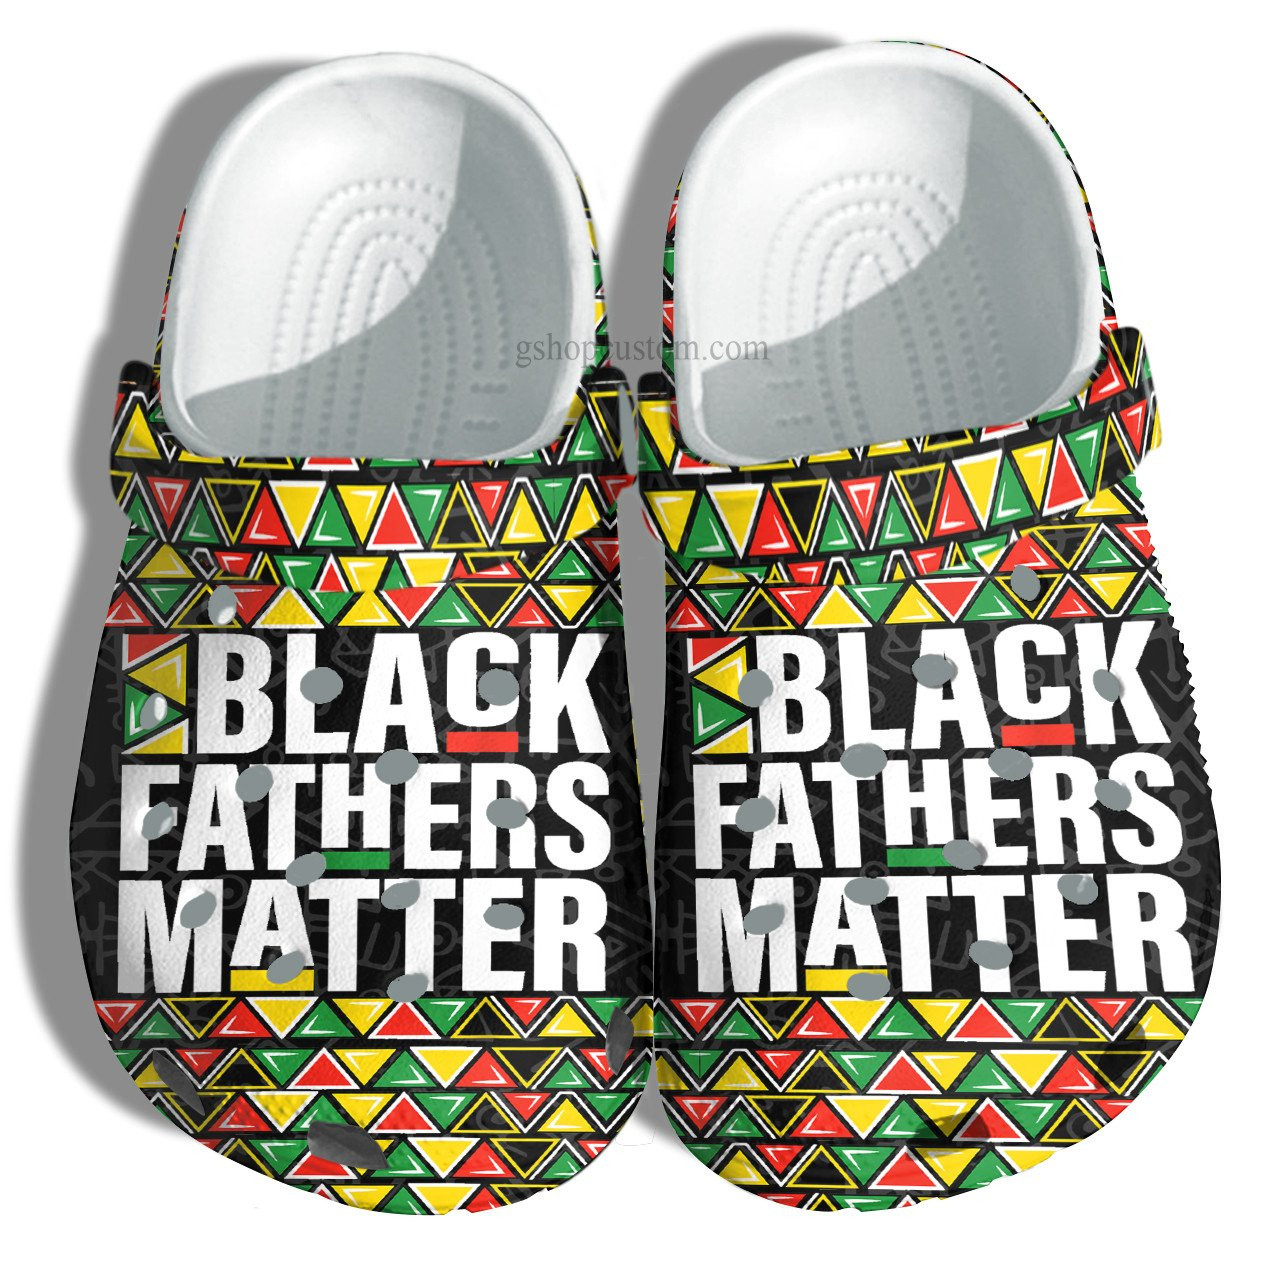 Black Fathers Matter Africa Style Croc Shoes Gift Grandpa Father Day- Black King Father Vintage Crocs Shoes Customize